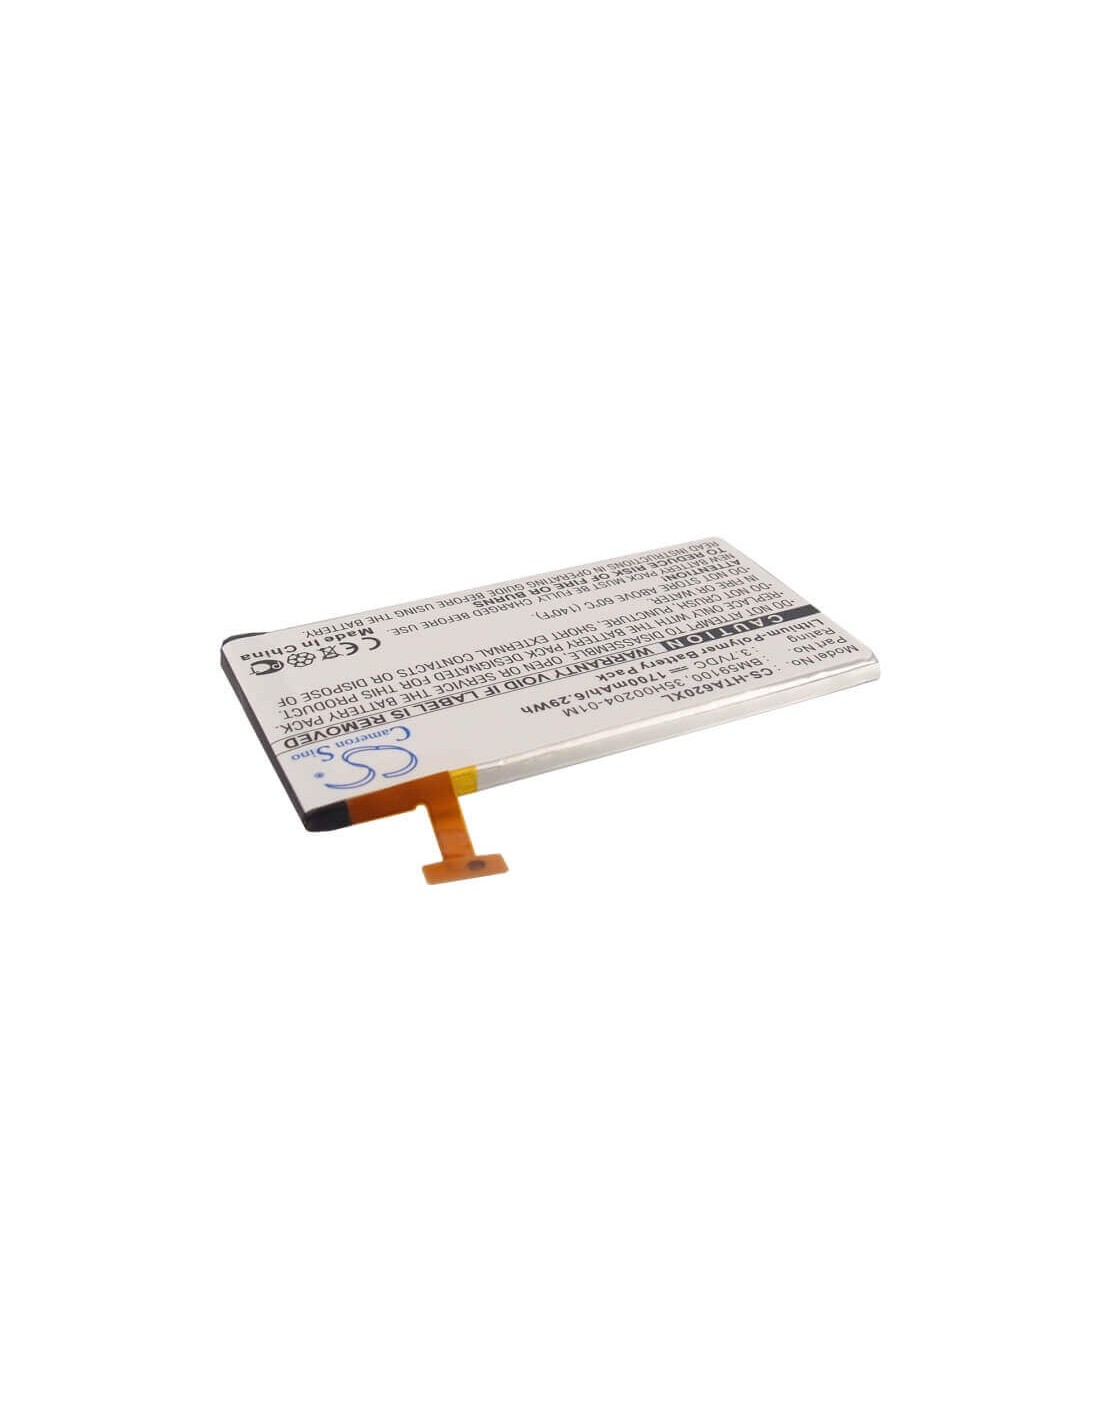 Battery for HTC Windows Phone 8S, PM59100, A620e 3.7V, 1700mAh - 6.29Wh